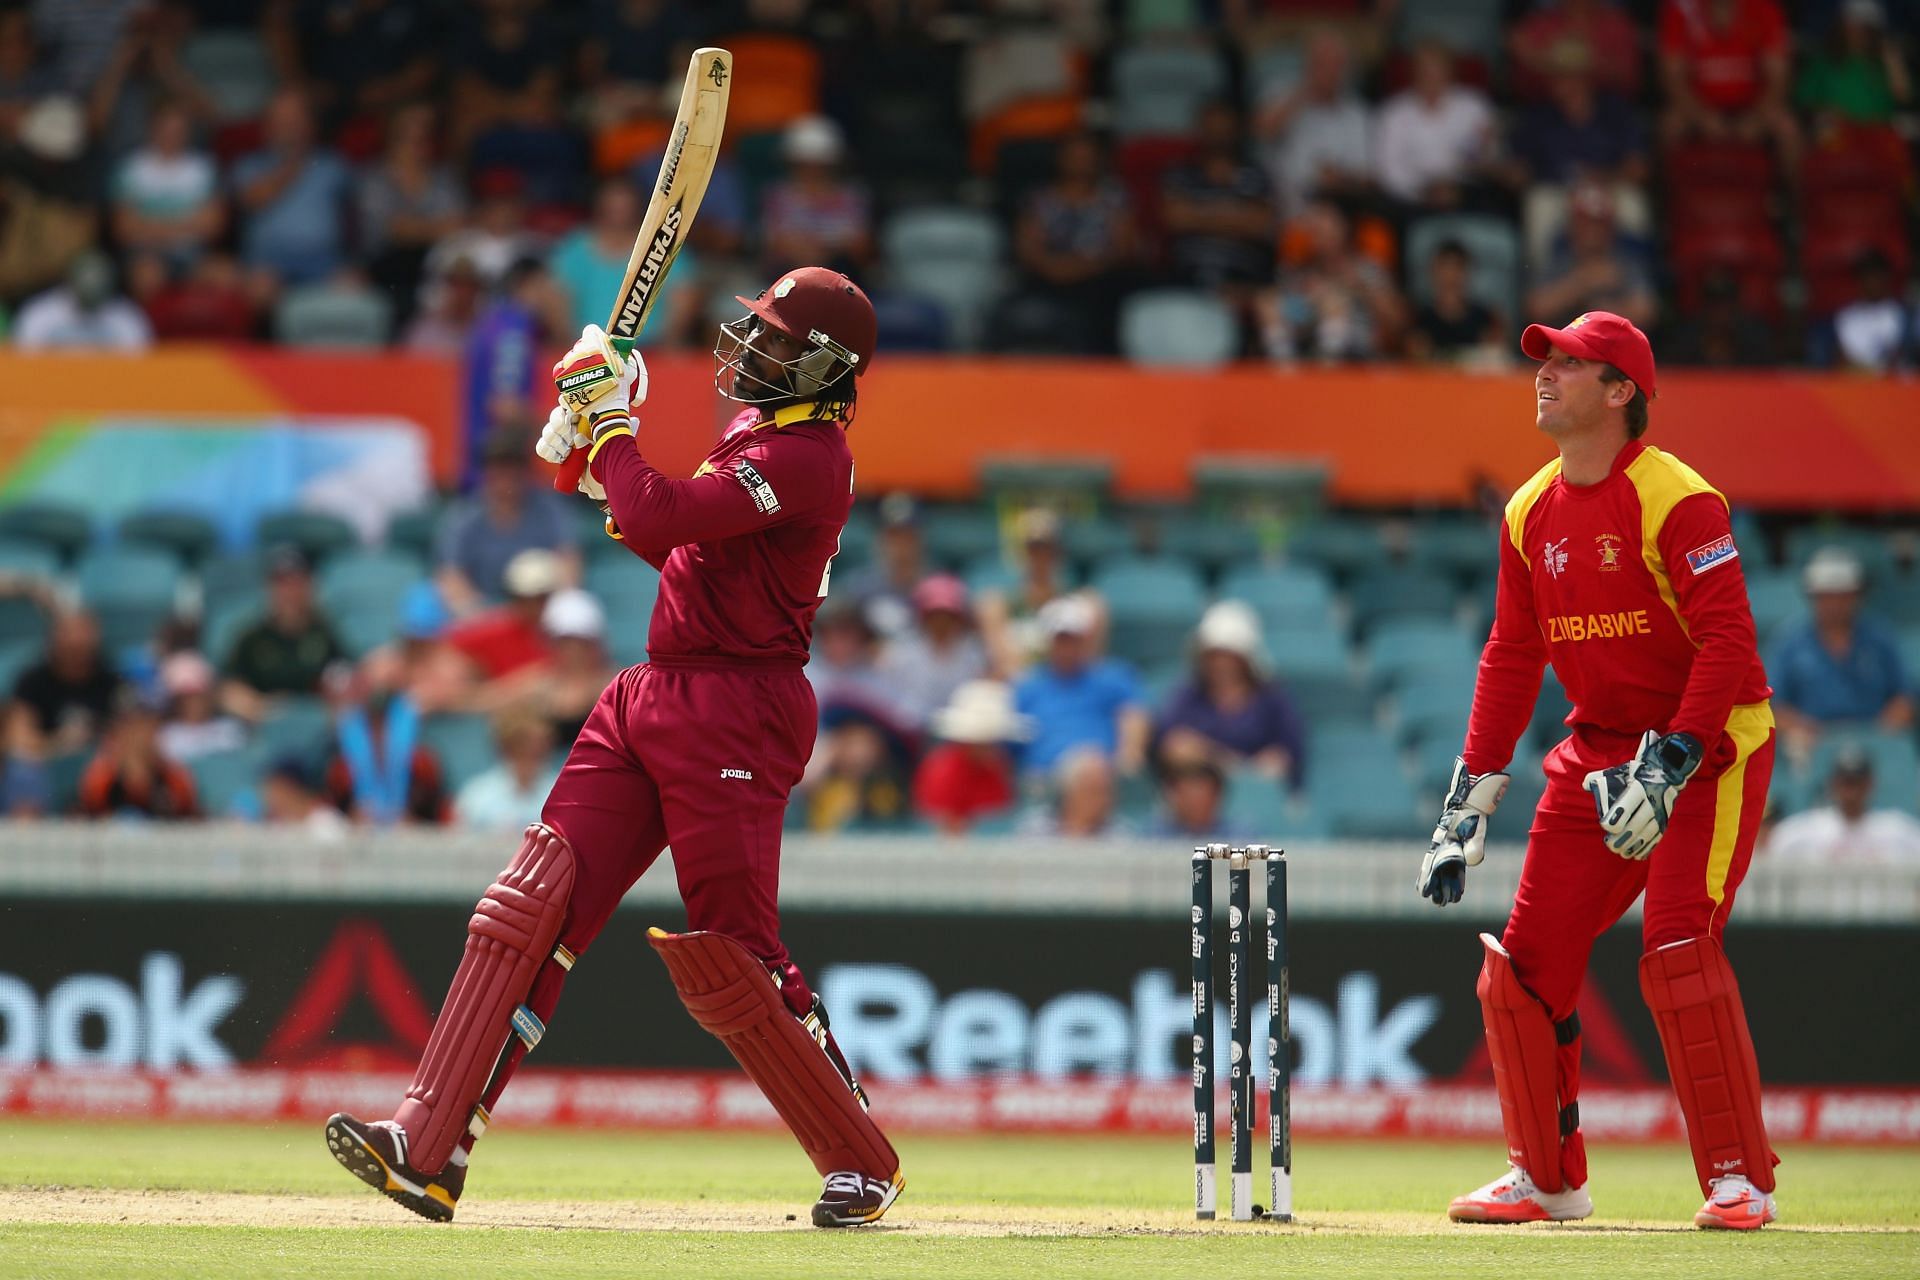 Chris Gayle is one of the two batters who has a double hundred in the Men&rsquo;s ODI World Cup. (Pic: Getty Images)